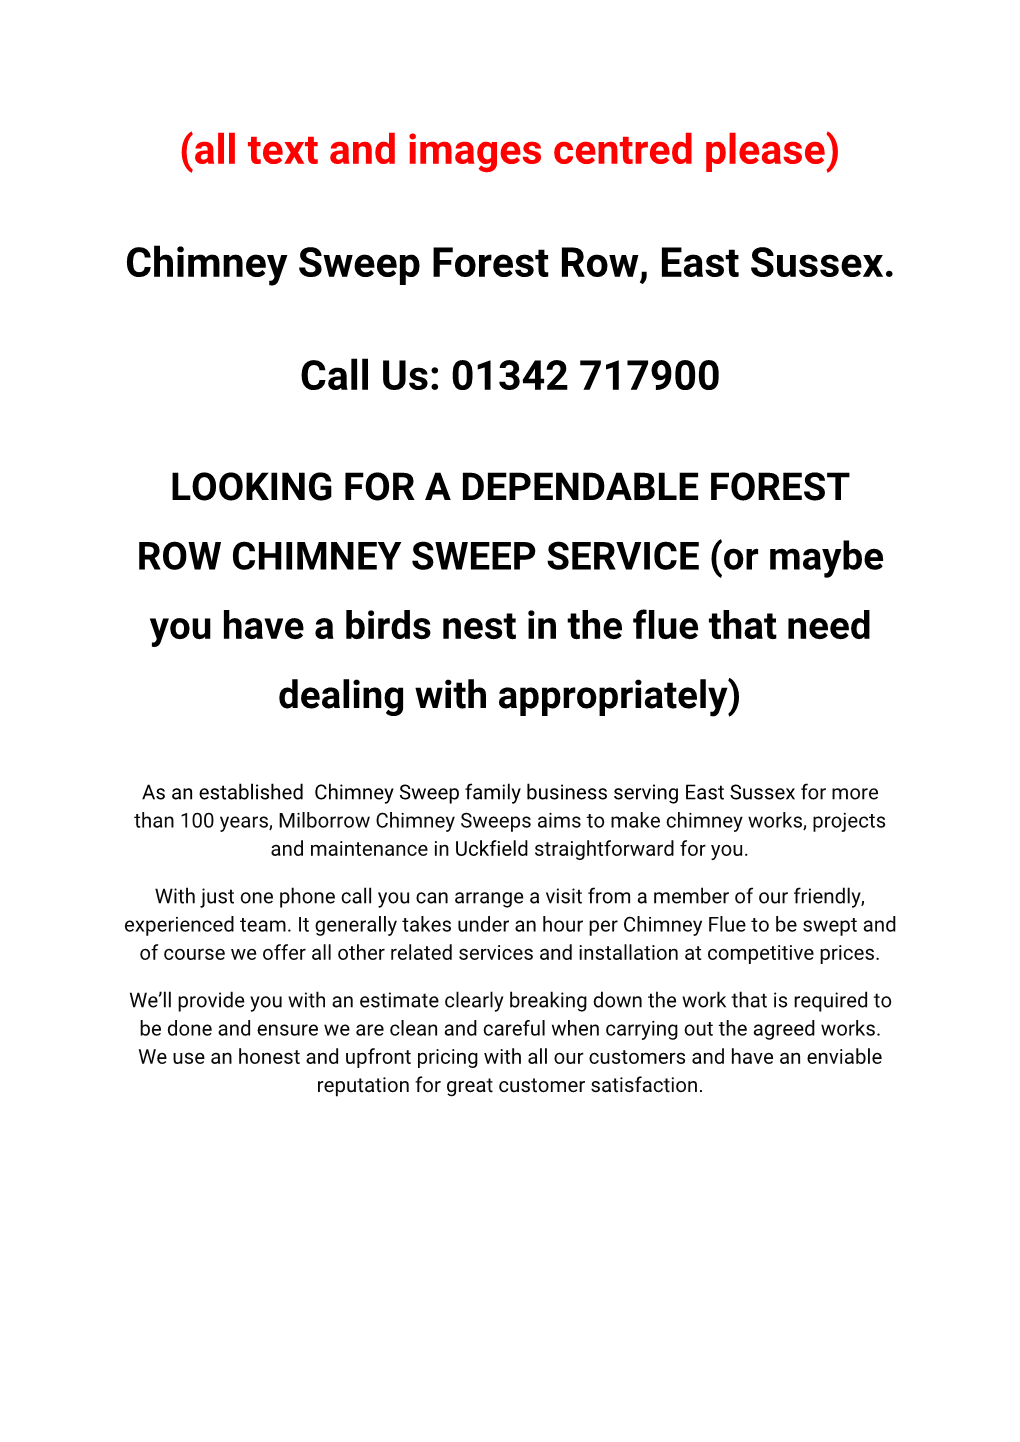 (All Text and Images Centred Please) Chimney Sweep Forest Row, East